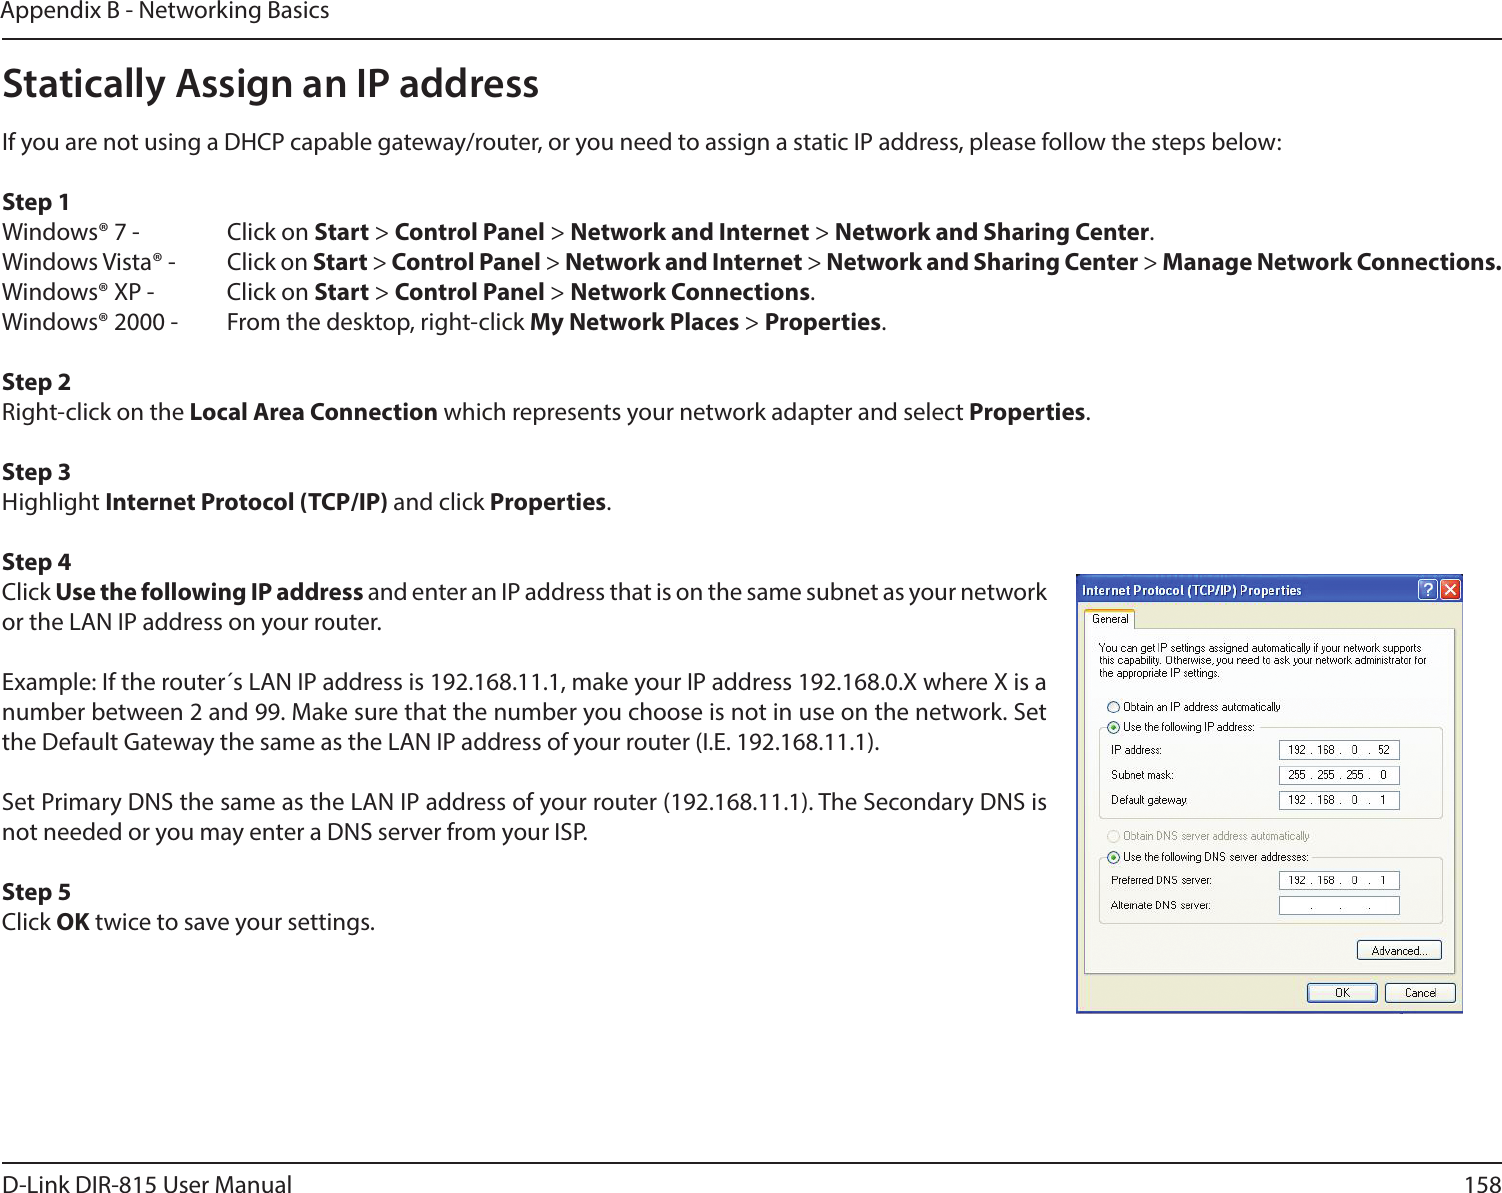 158D-Link DIR-815 User ManualAppendix B - Networking BasicsStatically Assign an IP addressIf you are not using a DHCP capable gateway/router, or you need to assign a static IP address, please follow the steps below:Step 1Windows® 7 -    Click on Start &gt; Control Panel &gt; Network and Internet &gt; Network and Sharing Center.Windows Vista® -  Click on Start &gt; Control Panel &gt; Network and Internet &gt; Network and Sharing Center &gt; Manage Network Connections.Windows® XP -  Click on Start &gt; Control Panel &gt; Network Connections.Windows® 2000 -  From the desktop, right-click My Network Places &gt; Properties.Step 2Right-click on the Local Area Connection which represents your network adapter and select Properties.Step 3Highlight Internet Protocol (TCP/IP) and click Properties.Step 4Click Use the following IP address and enter an IP address that is on the same subnet as your network or the LAN IP address on your router. Example: If the router´s LAN IP address is 192.168.11.1, make your IP address 192.168.0.X where X is a number between 2 and 99. Make sure that the number you choose is not in use on the network. Set the Default Gateway the same as the LAN IP address of your router (I.E. 192.168.11.1). Set Primary DNS the same as the LAN IP address of your router (192.168.11.1). The Secondary DNS is not needed or you may enter a DNS server from your ISP.Step 5Click OK twice to save your settings.